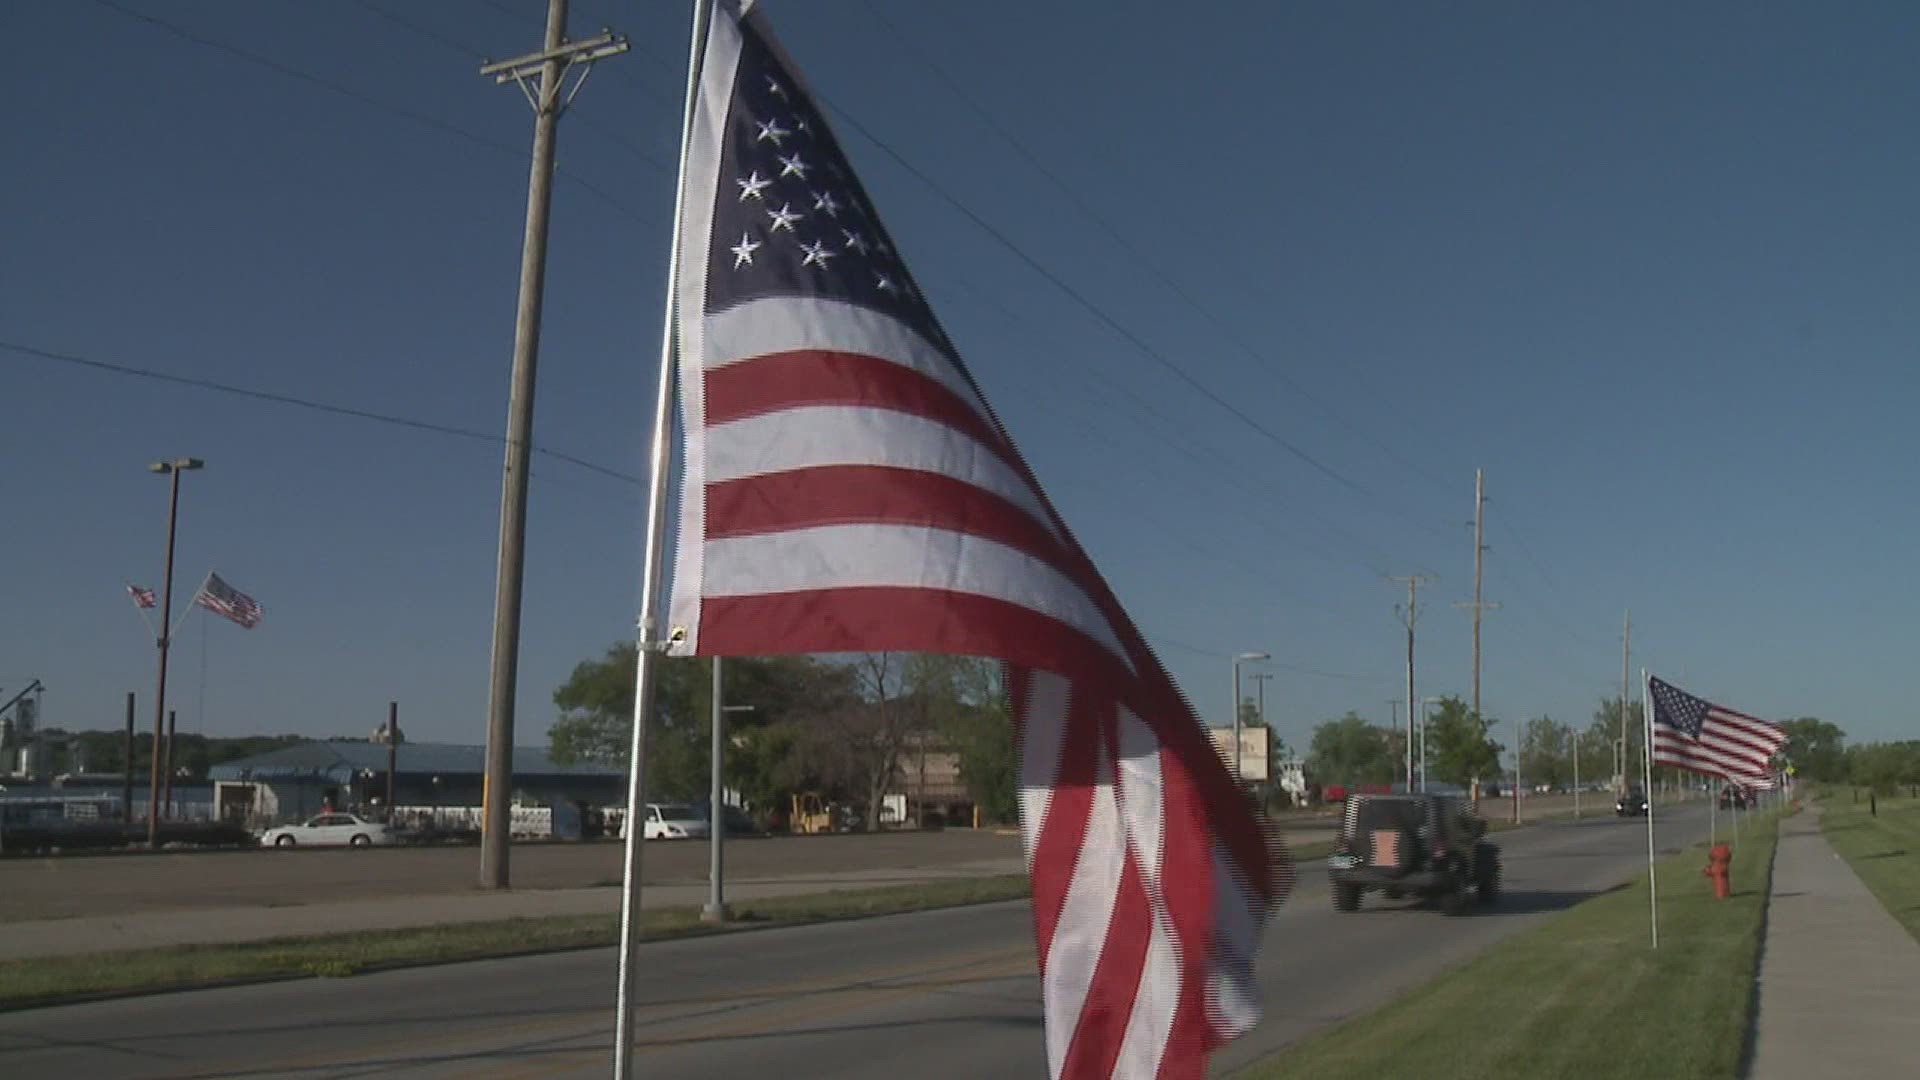 Selling flags is the Optimist Club's main fundraiser each year. The group is putting out more than 1,000 flags this year.